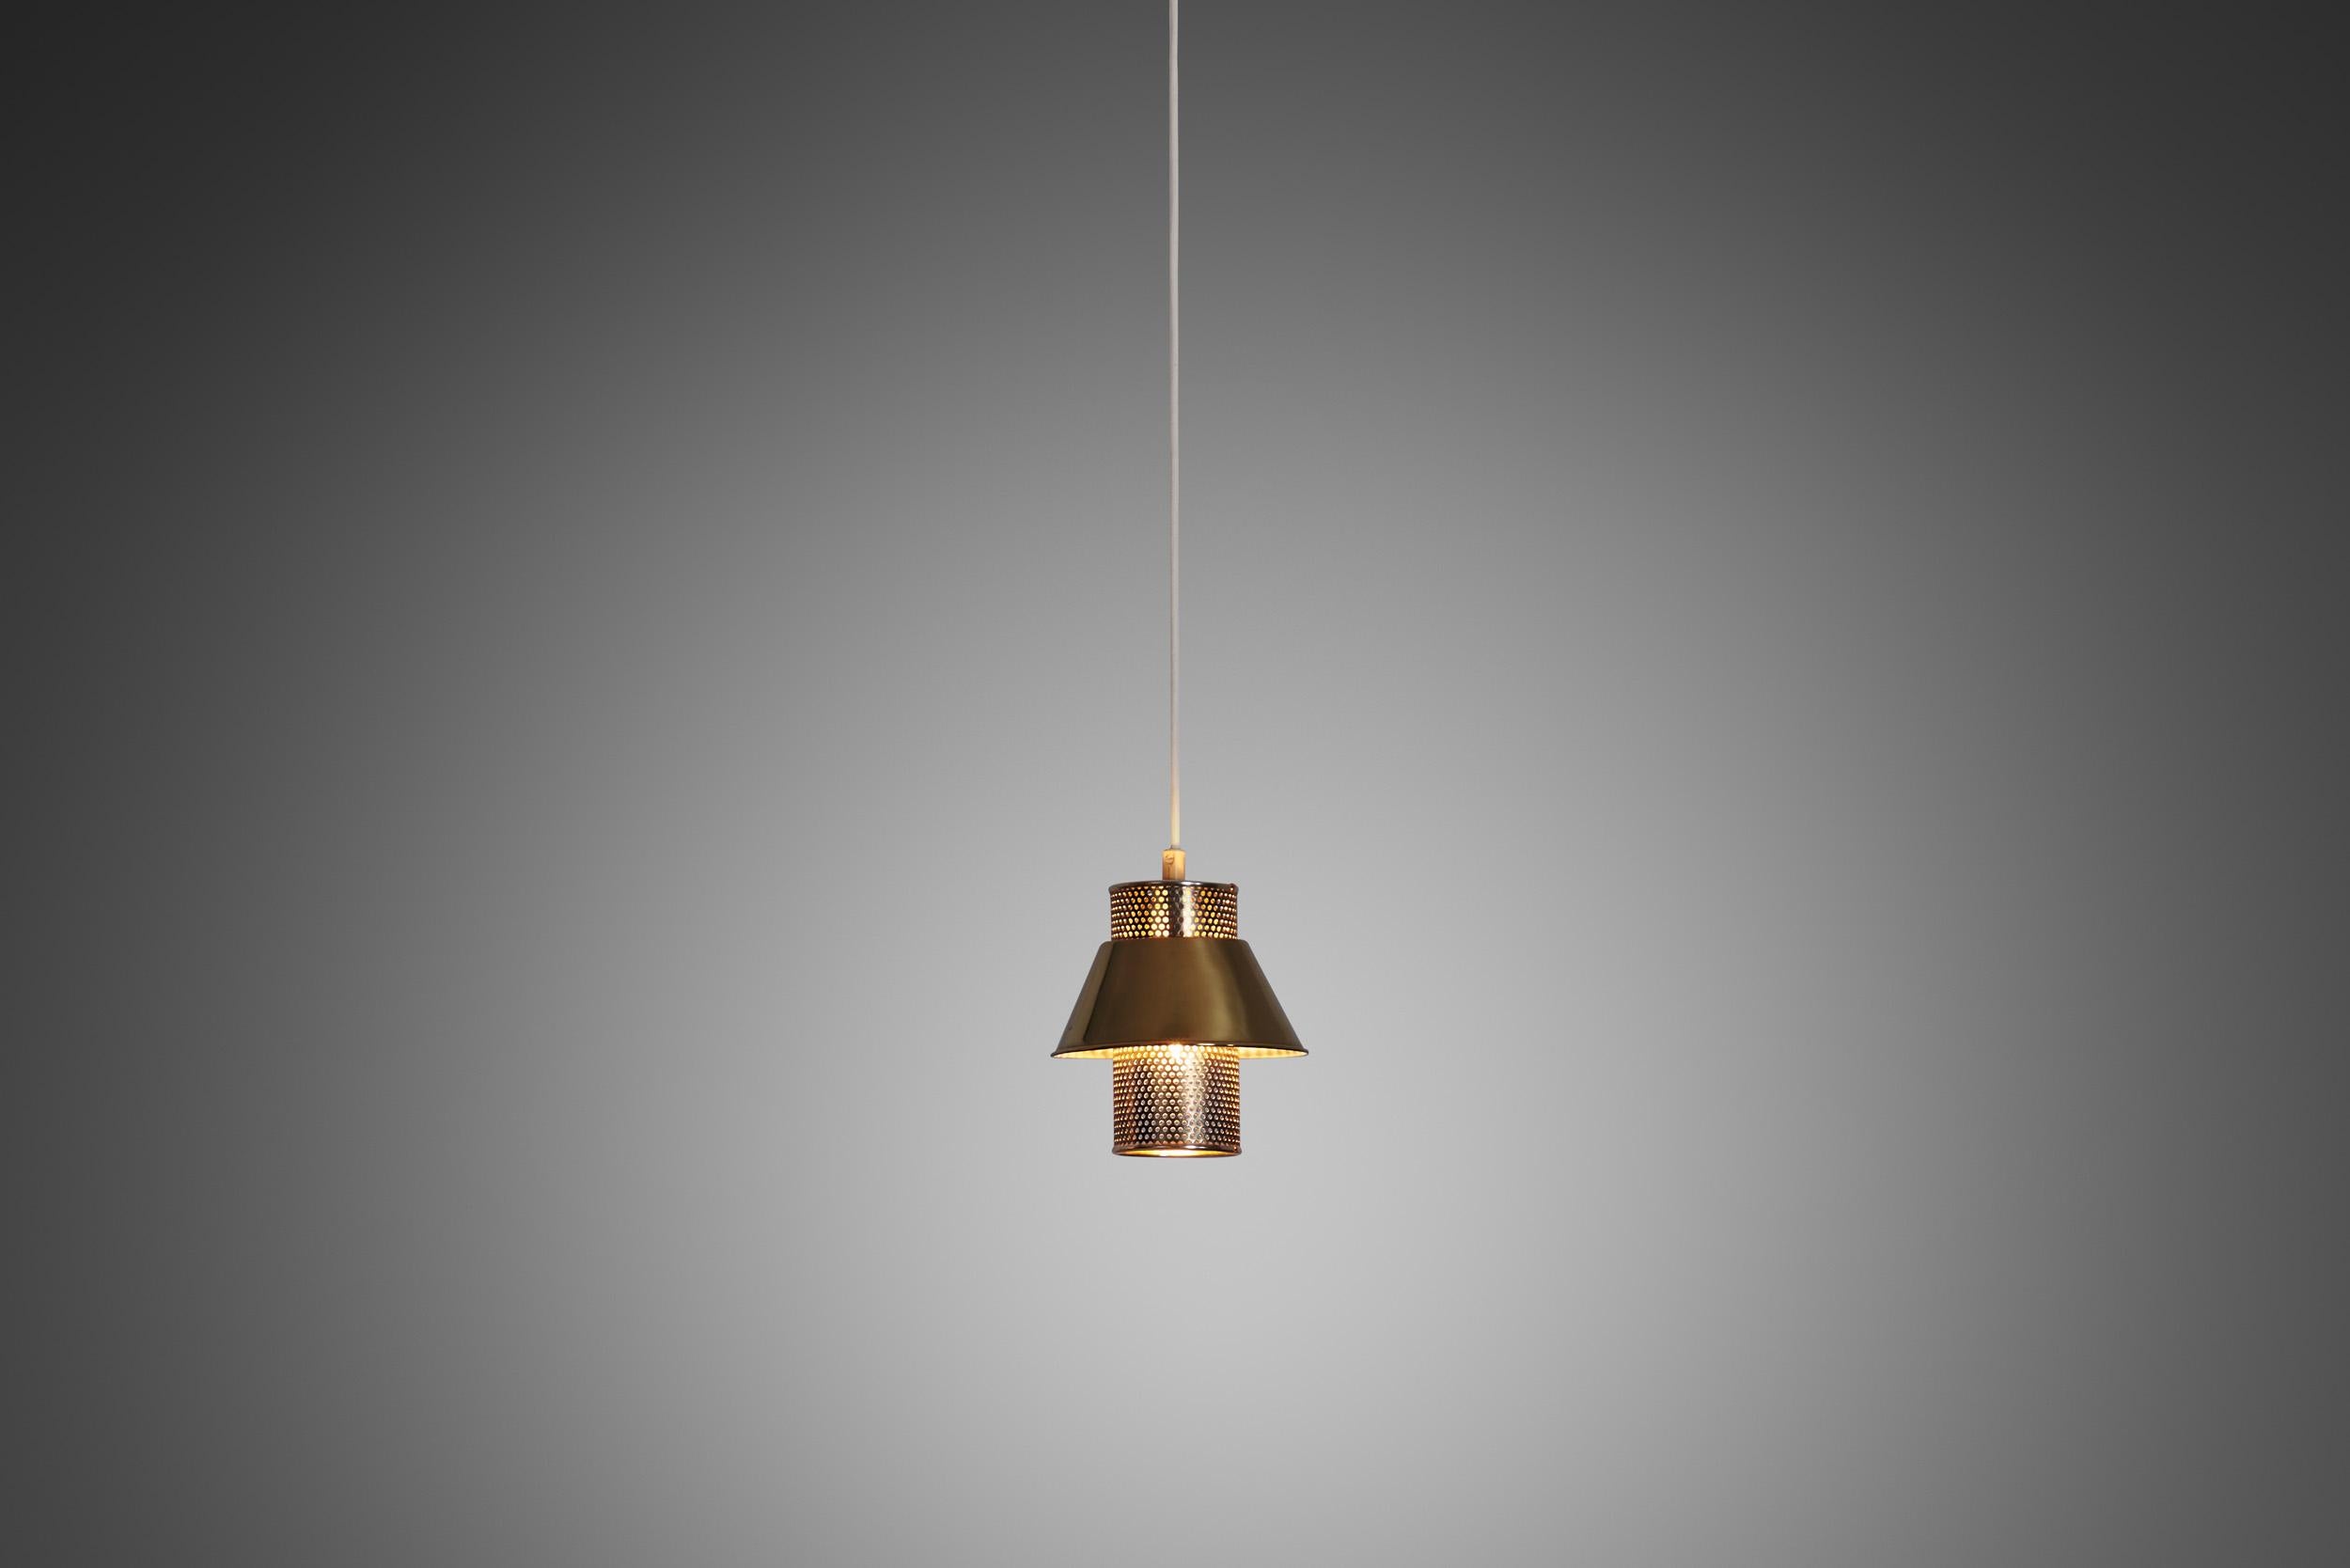 The T766 pendant lamp is a stunning example of Swedish modern design. Hans-Agne Jakobsson was a prominent designer and lighting manufacturer who played a crucial role in shaping the aesthetic of Swedish design during the mid- and even later part of